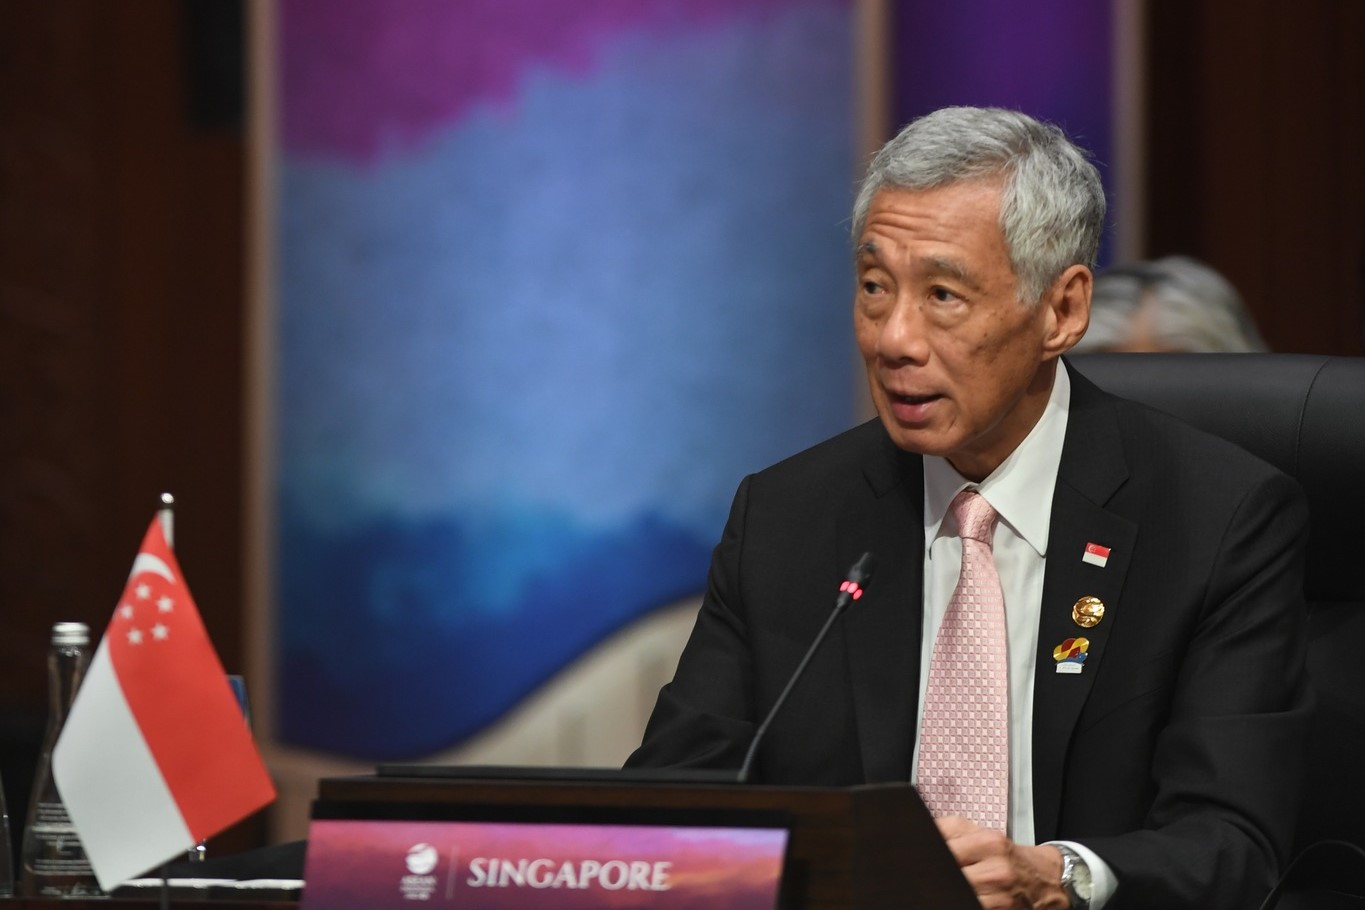 Singapore's Lee Hsien Loong to step down as PM, succeeded by Lawrence Wong